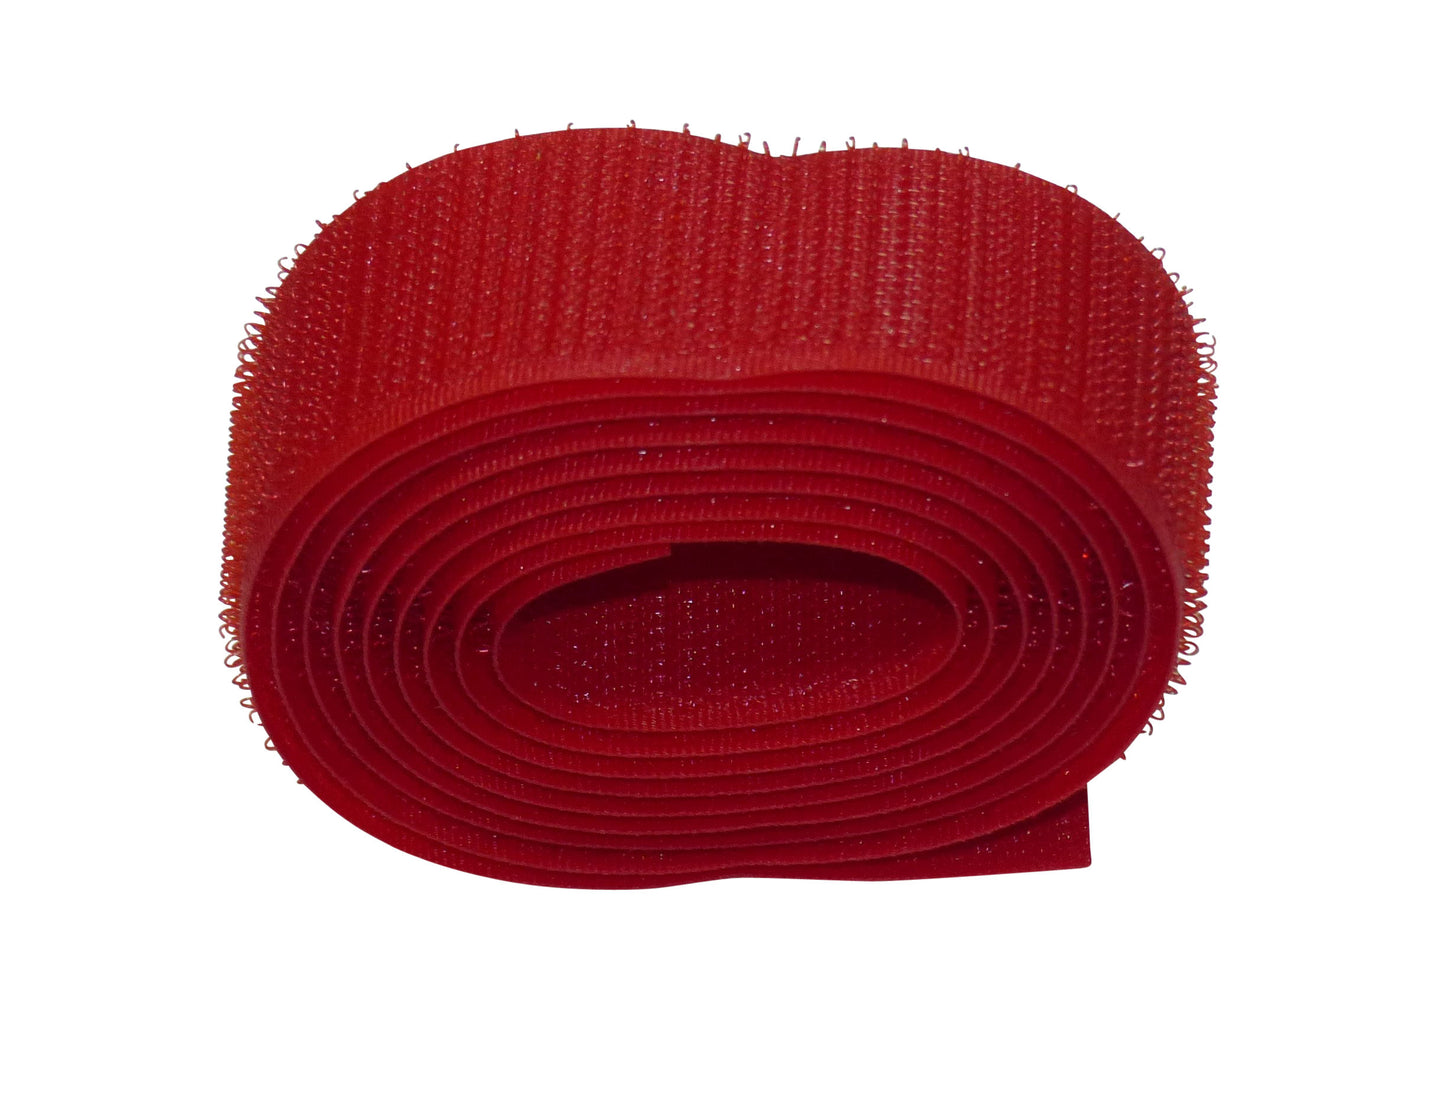 Benristraps 25mm sewable hook and loop tape (2 metres) hook only in red